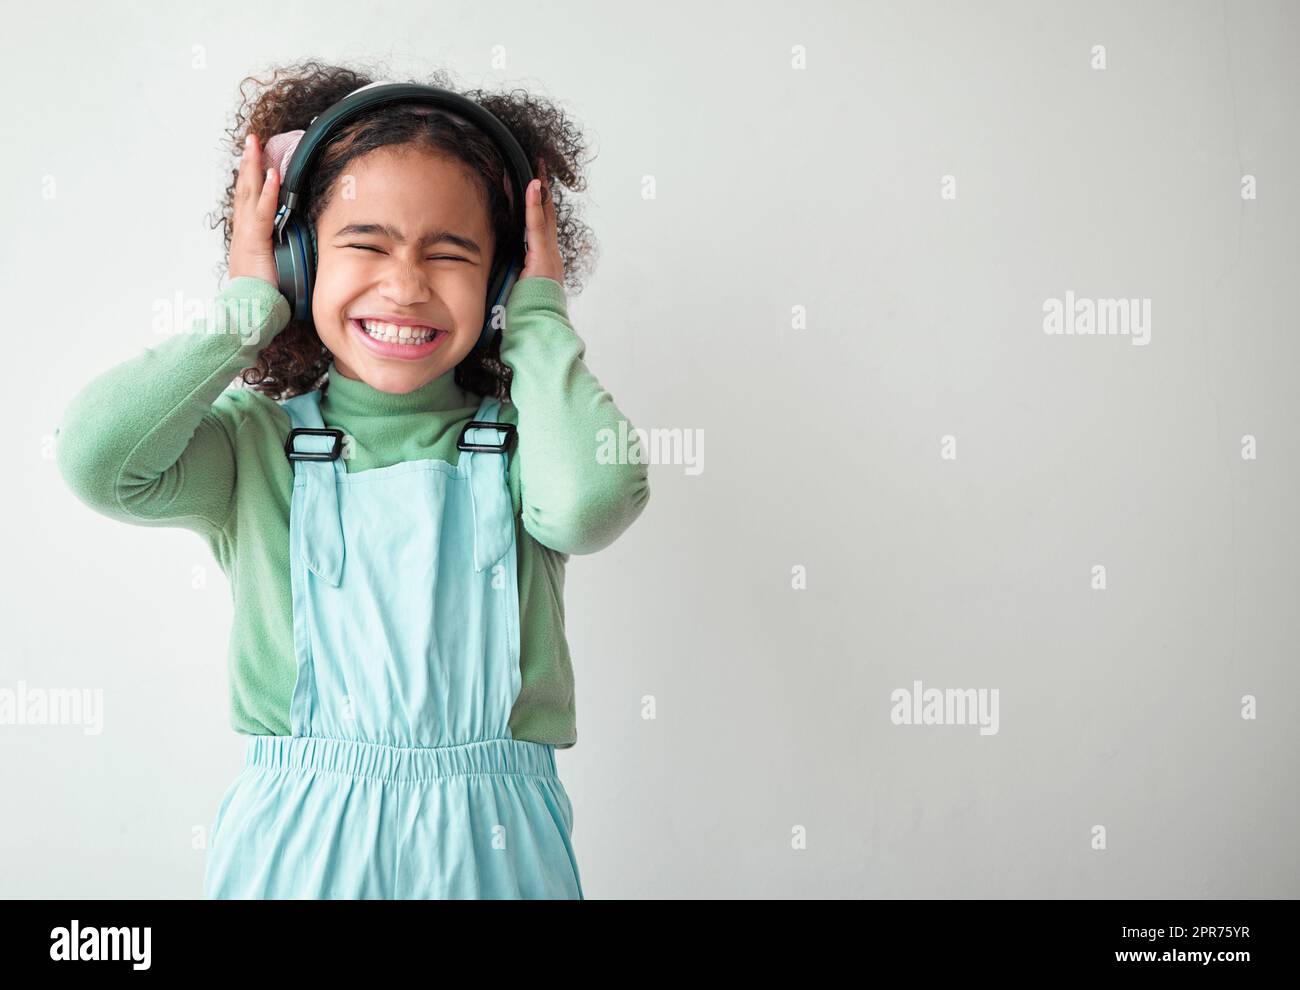 Grace was in all her steps. Shot of an little girl standing alone e and listening to music through headphones against a grey background. Stock Photo